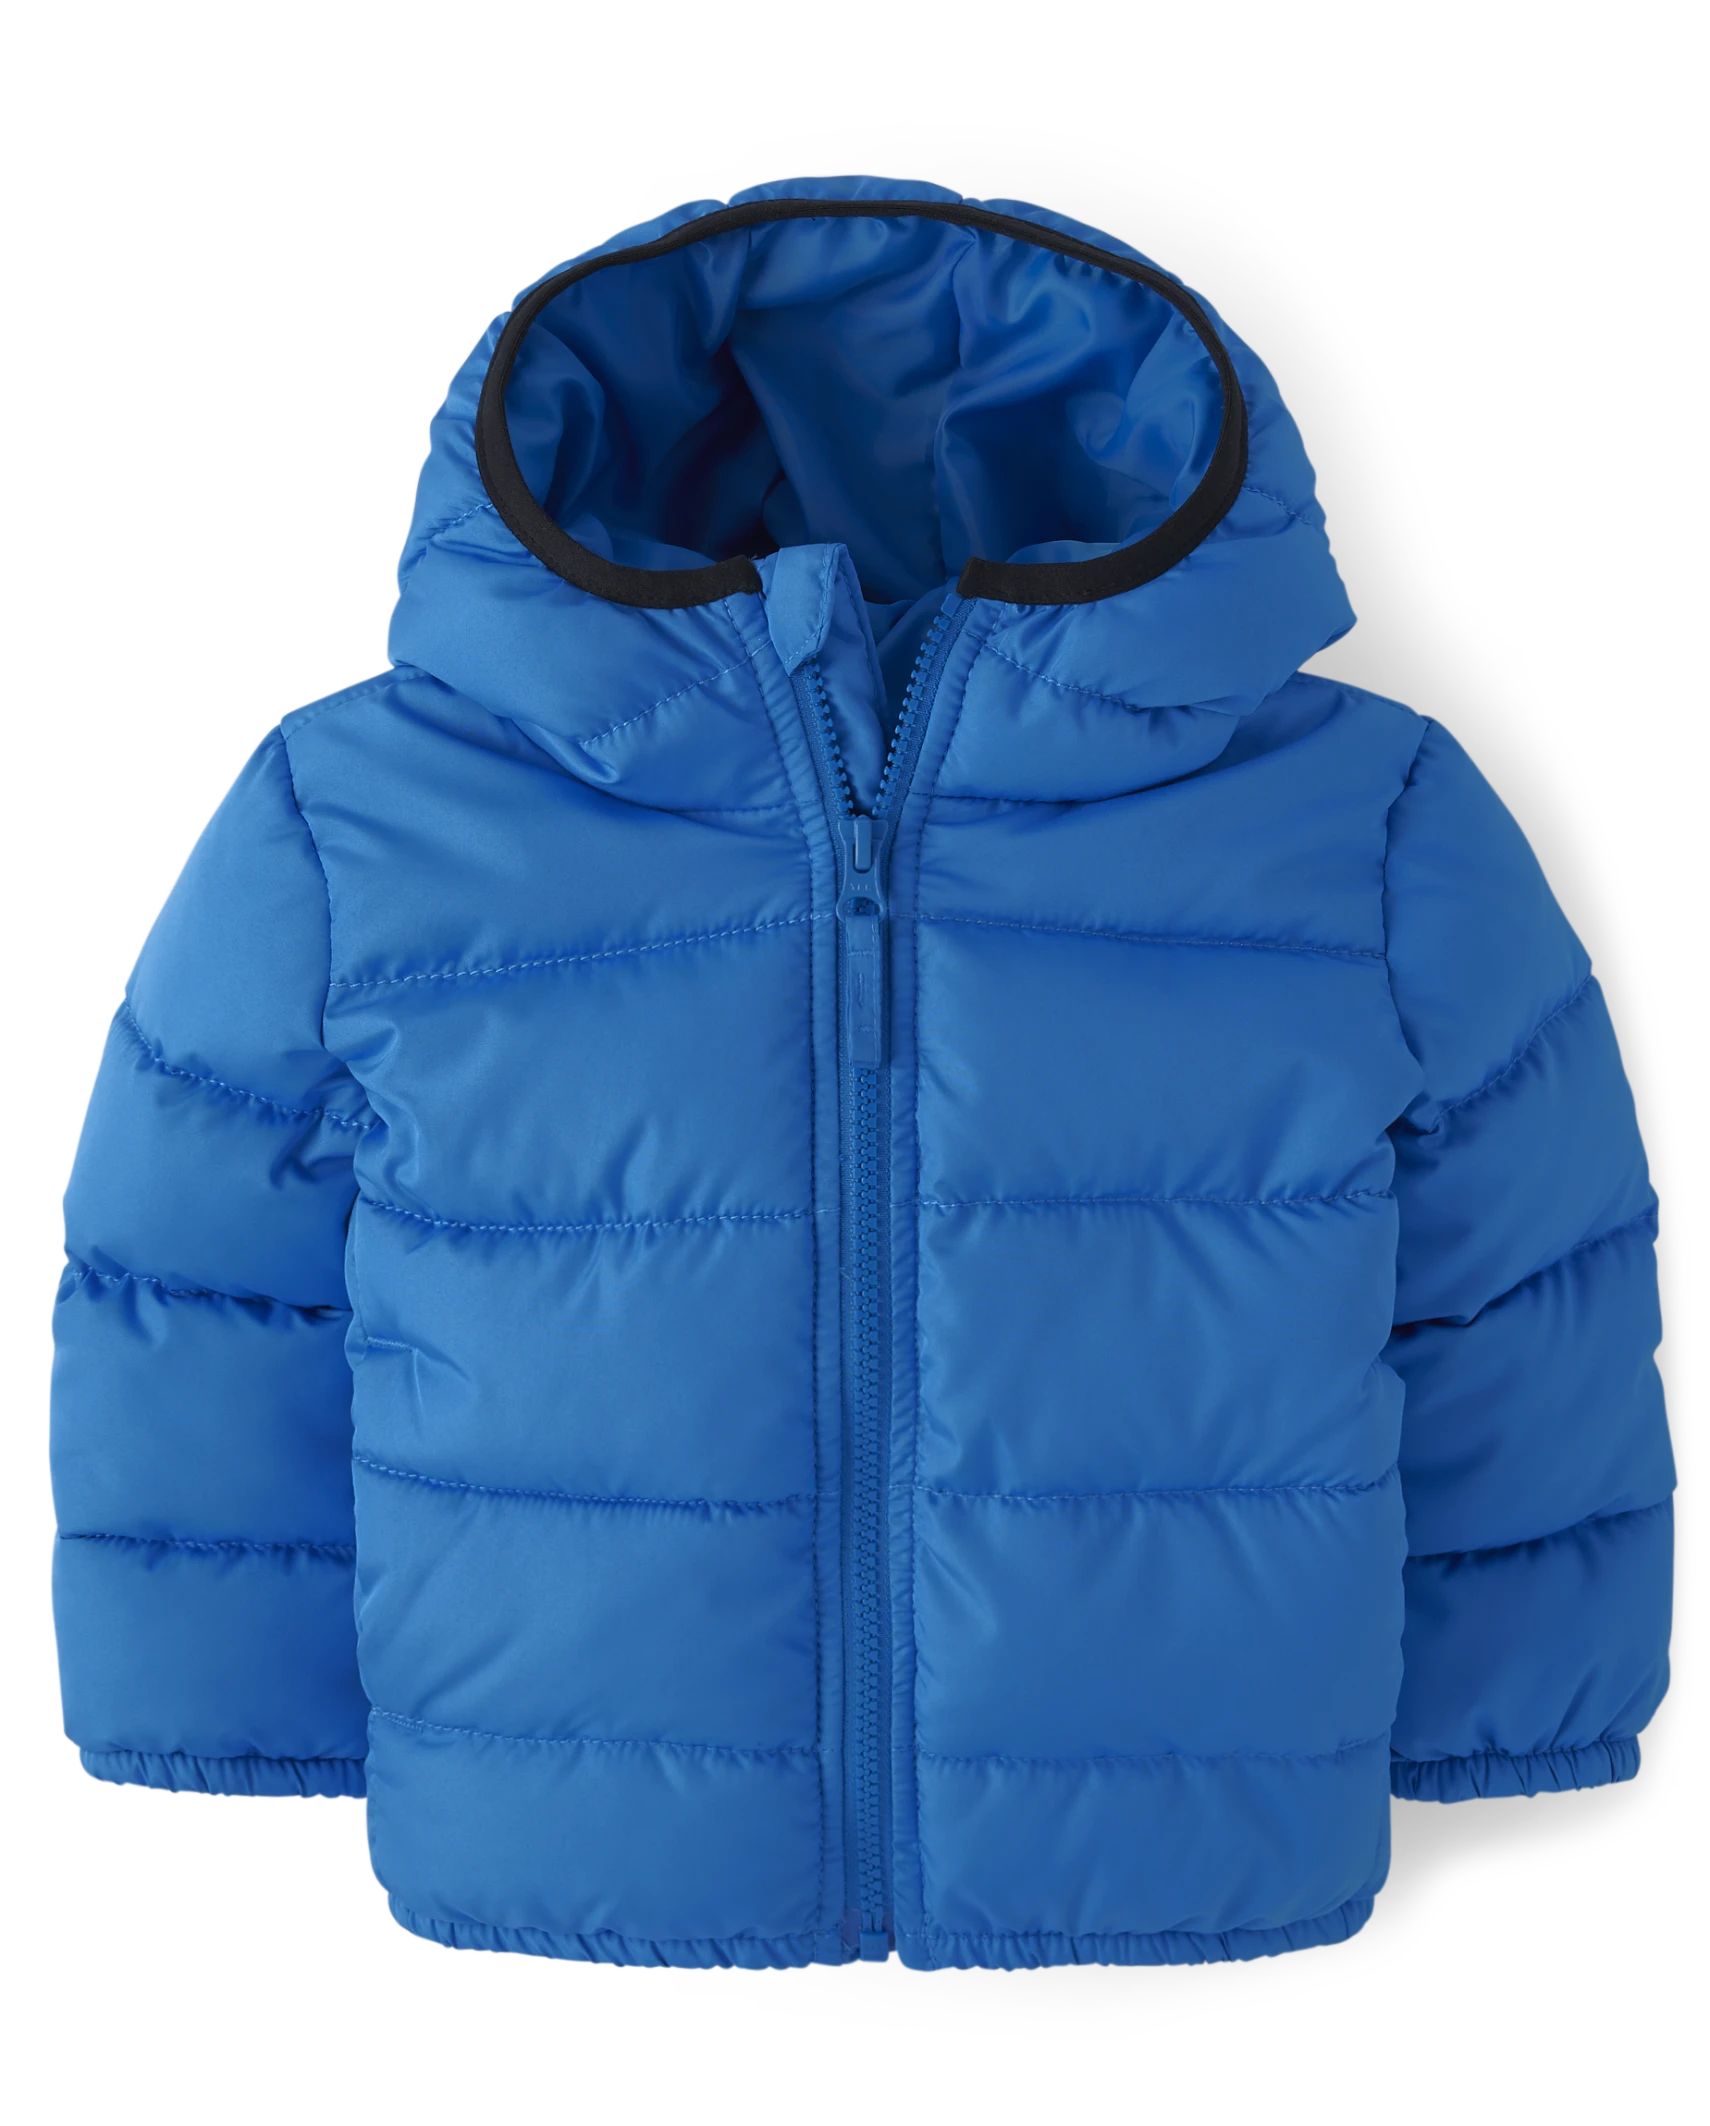 Toddler Boys Puffer Jacket - toucan feather | The Children's Place